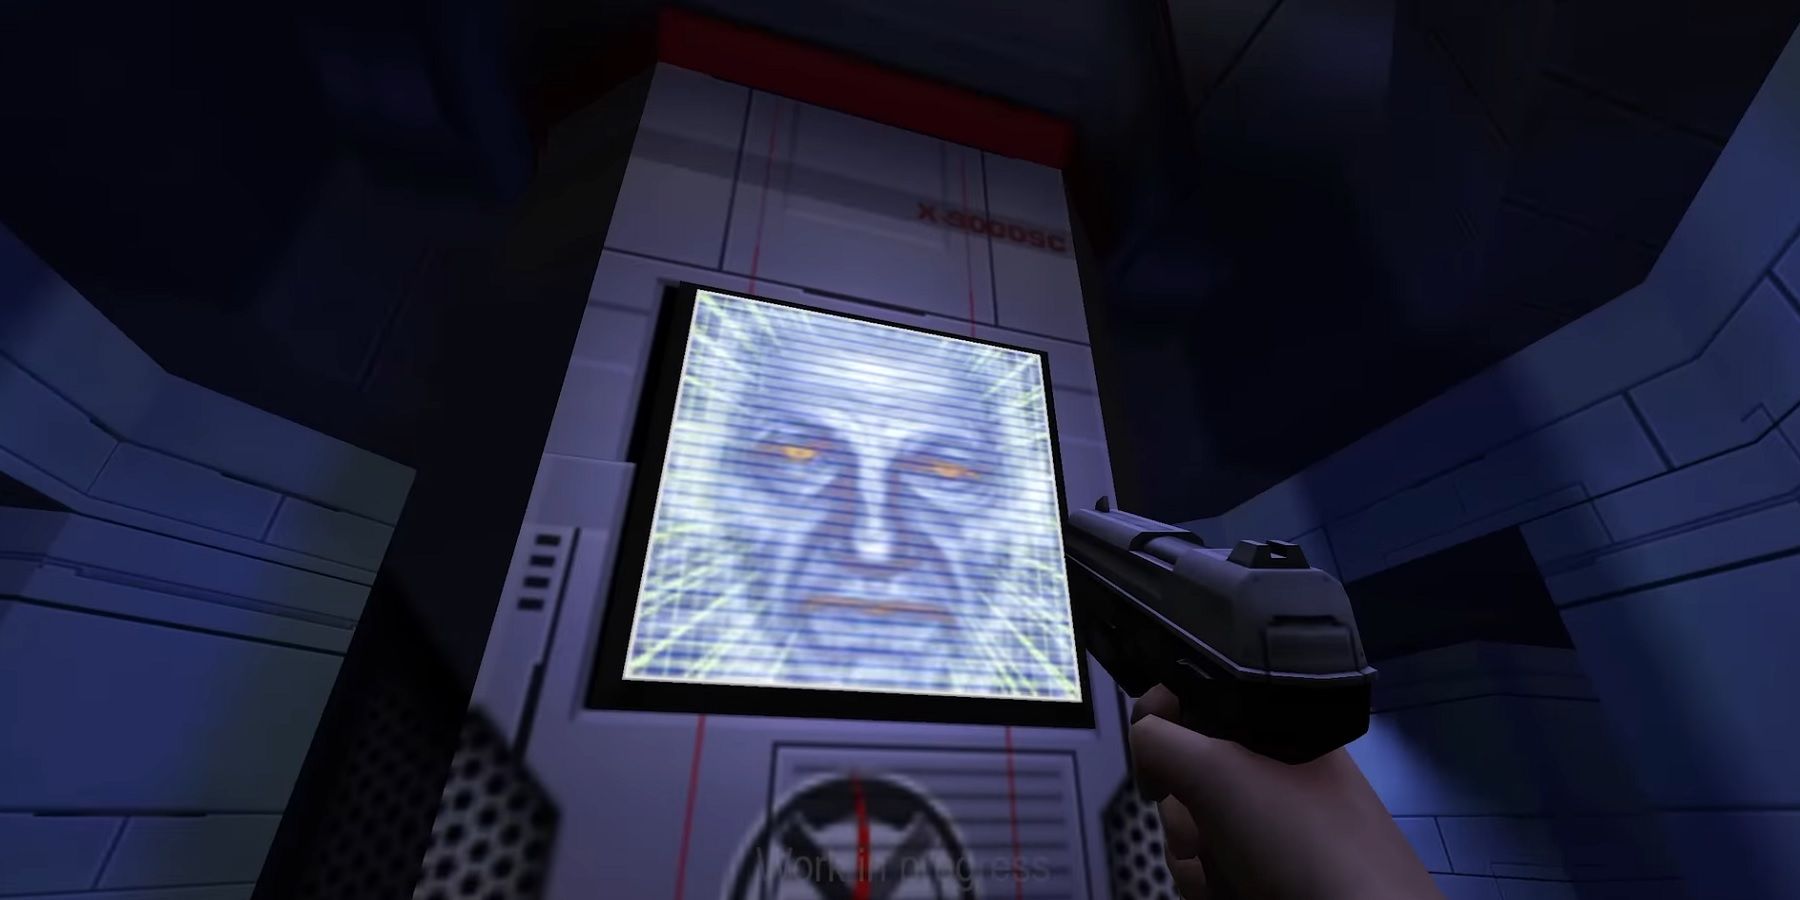 Image from t he Enhanced Edition of System Shock 2 showing the player looking up at a screen.